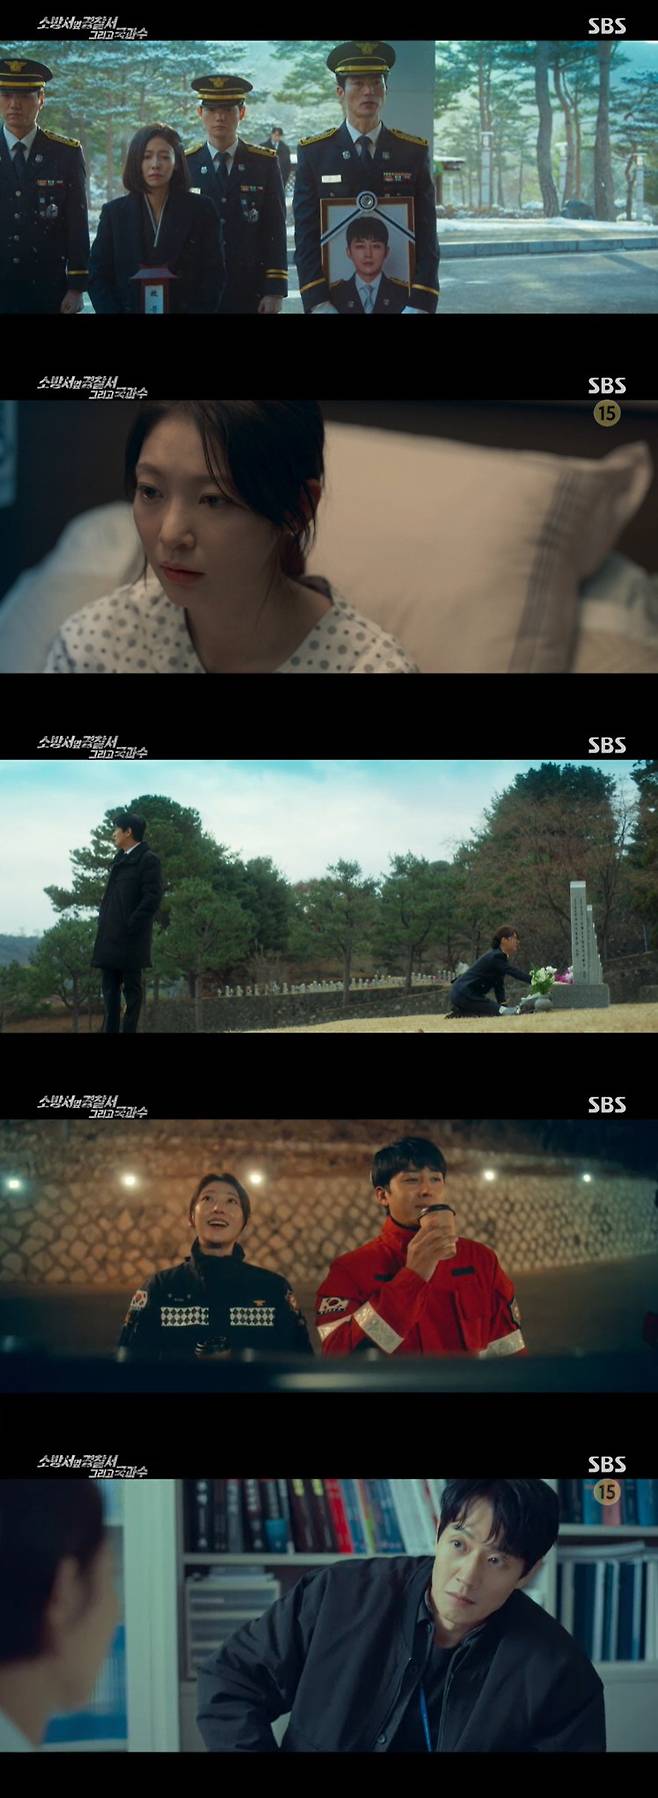 Son ho joon sacrificed himself to leave evidence to prevent further damage.In the SBS Friday-Saturday drama The police station next to the fire station a, which aired on the 11th, Bong Do-jin (Son ho joon) was found dead.Bong Do-jin proposed to Tongue-in-cheek (Gong Seung-yeon), who said, Im afraid of going into the fire these days.Im afraid of that, he confessed to tongue-in-cheek. Why do you make such a strange sound? Tongue-in-cheek said, Do not cry too much.However, this was not the case: Bong Do-jin was discovered as a cold corpse, while Qin Hao (played by Kim Rae-won), his family at the fire station, and his younger sister Bong Anna (played by Ji-woo) all sobbed.A fellow firefighter said, I went in alone when I heard that there was a child (Bong Do-jin) who couldnt come inside.After Bong Do-jins death, the Qin Hao dog began to dig into the incident with venom. Theres something you need to see. Bong Anna brought Bong Do-jins oxygen respirator.I wonder why he took off the air breathing machine. Baek Cham (Seo Hyun-chul) also questioned, Who else was there other than Dojin? Even testimony came out that Dojin said he saw a star-shaped flame in the material warehouse. Qin Hao had the possibility of being killed, saying, It is unlikely to be a simple accident.Bong Do-jins autopsy was carried out under Qin Haos view. The eyeballs were gone, said yoon hong (played by Son Ji-yoon), who performed the autopsy himself.From the esophagus to the stomach were filled with white crystals from the Grammy Award for Best Rap Performance. After everyone left, yoon hong said, Im sorry I cut your body.Tongue-in-cheek, conscious, also sobbed at the belated news.Upon his return, Tongue-in-cheek arranged Bong Do-jins locker alone, which contained a note Bong Do-jin had written to his family and tongue-in-cheek.In the letter, Bongdojin said, If the day comes when I can not get out of the fire, so if you read this letter, I will just be relieved by the fact that you were not next to me at that moment.As a result of the autopsy, it was the components that constituted the candle that flowed into the stomach and esophagus of the bongojin just before Death.Matthew (Lee Do-yeop) took a break for a while and fell down after taking a drug that caused cardiac arrest for 30 minutes.Qin Hao identified Dok Go-soon (played by Woo Mi-hwa) as the key suspect in The Texas Chainsaw Massacre: The Beginning arson attack.Tongue-in-cheek, yoon hong, and bong Anna decided to reconstruct the fire by making Candle with Candle ingredients. As a result of each fire with the manufactured Candle, the high-temperature paraffin candle exploded with Jeriken.Tongue-in-cheek said, If you were Dojin, you would have known it as soon as you saw it. Bongdojin had already predicted the explosion. Bongdojin had eaten Candle to get evidence before everything disappeared.The Texas Chainsaw Massacre: The Beginning arsonist delayed the fire with a candle, causing a simultaneous fire. The tongue-in-cheek was neither a murder nor an accident.The sacrifice of a firefighter to save everyone. That is the truth of this death. With the evidence gathered, Qin Hao identified only Yang Shuang as The Texas Chainsaw Massacre: The Beginning arsonist.Then Yang Shuang confronted Tongue-in-cheek in front of Bong Do-jins house and attacked him with a hammer.